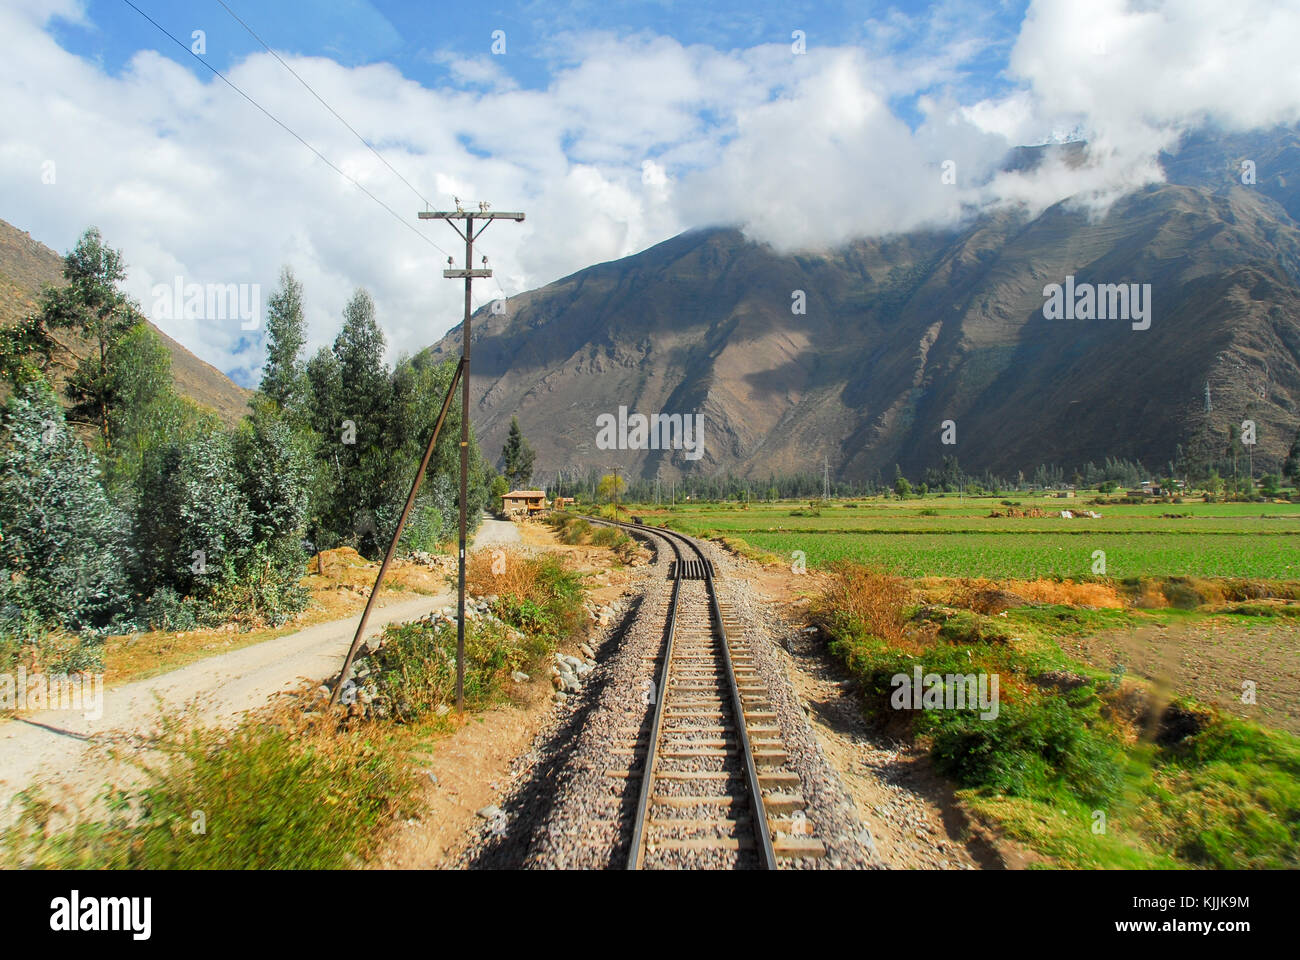 Railroad Tracks through the Andes Mountains in Peru, between Cusco and Machu Picchu Stock Photo